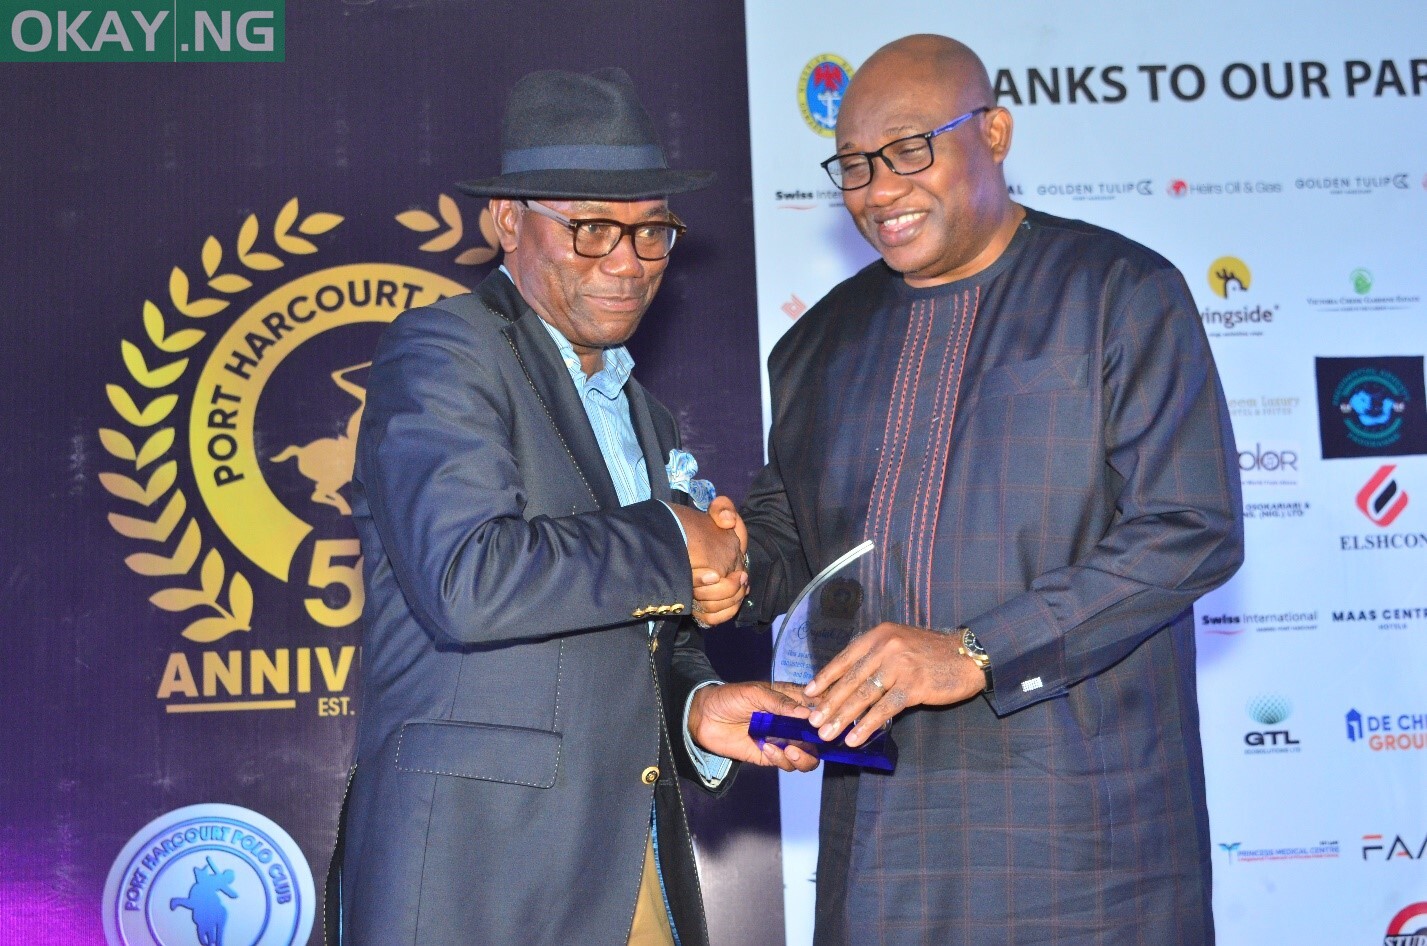 Right: Shell Corporate Relations Manager, Mr. Evans Krukrubo, receives the Crystal Award for Shell Nigeria Exploration and Production Company (SNEPCo) from Dr. Emi Membere-Otaji, Managing Director/CEO, Elshcon Group of Company, at the ceremony to celebrate the prestigious Port Harcourt Polo Club 50th anniversary.